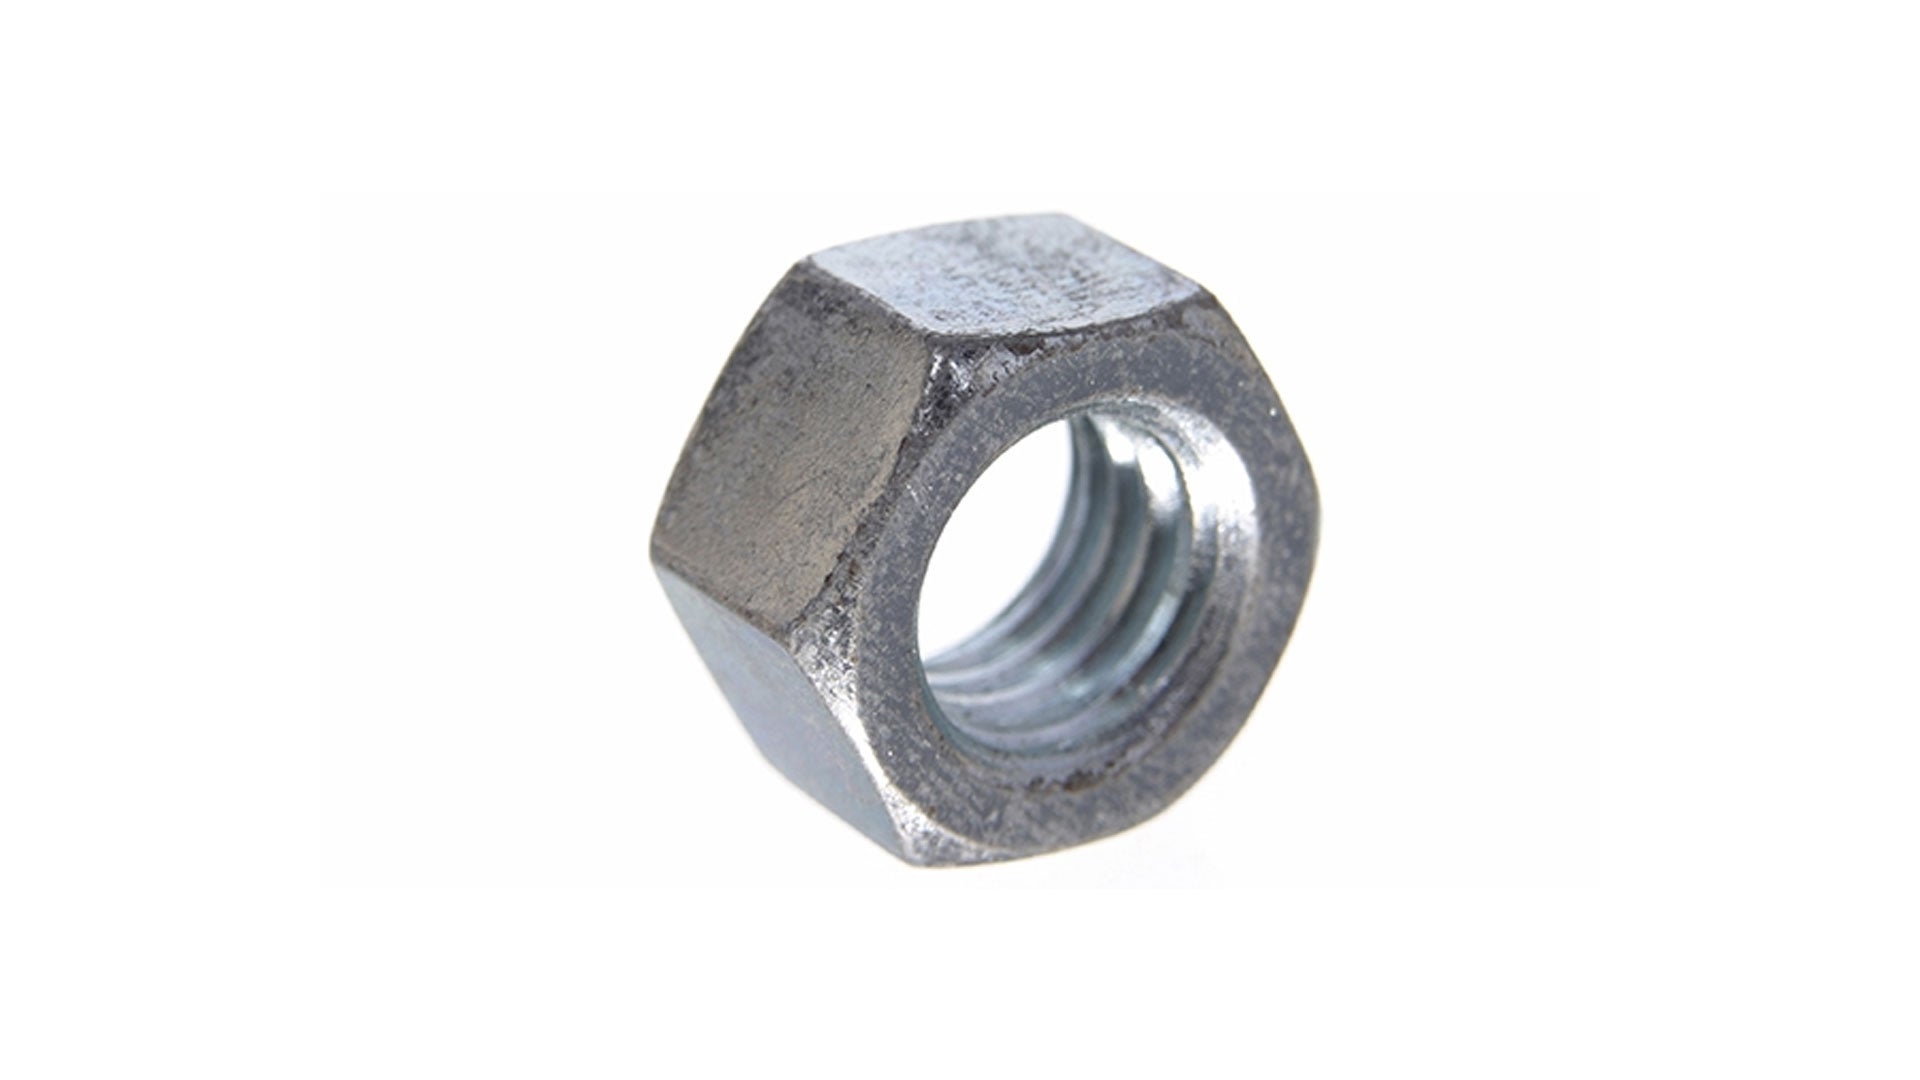 Bus Duct Replacement Nuts, bus duct parts, medium voltage bus system replacement parts